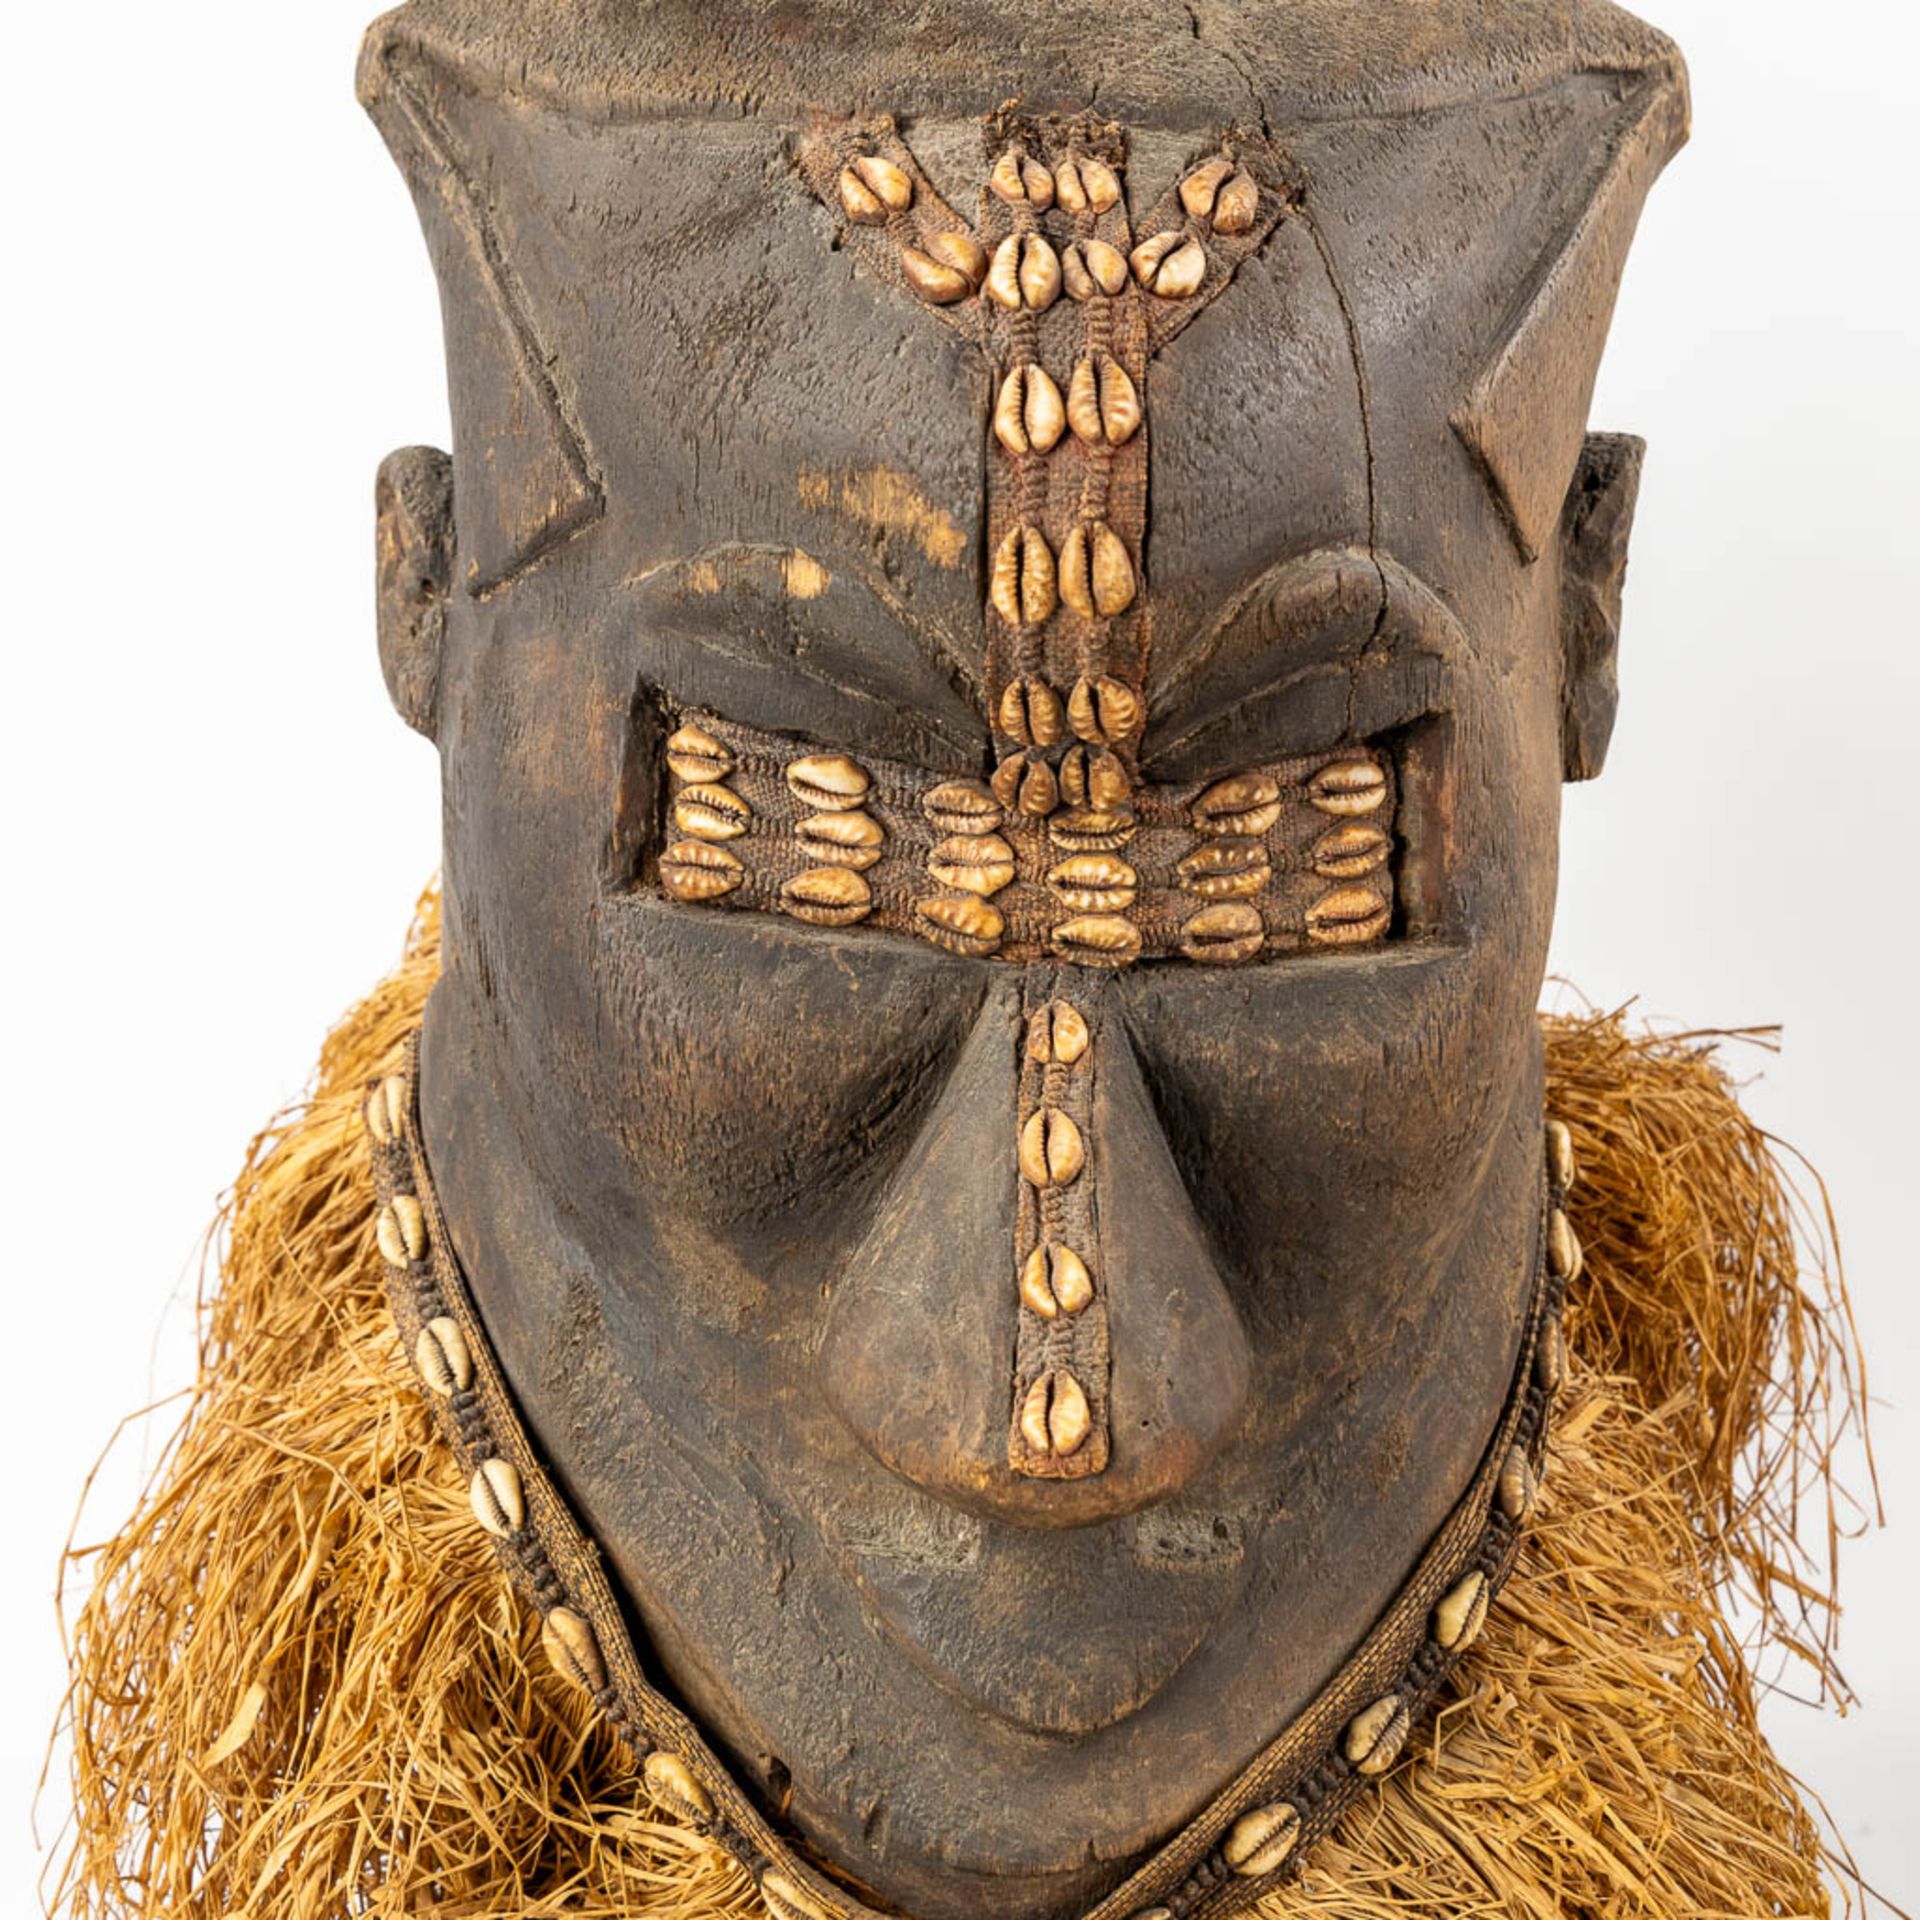 Suku Tribe, two decorative African masks. Wood and straw. (L:44 x W:40 x H:48 cm) - Image 9 of 11